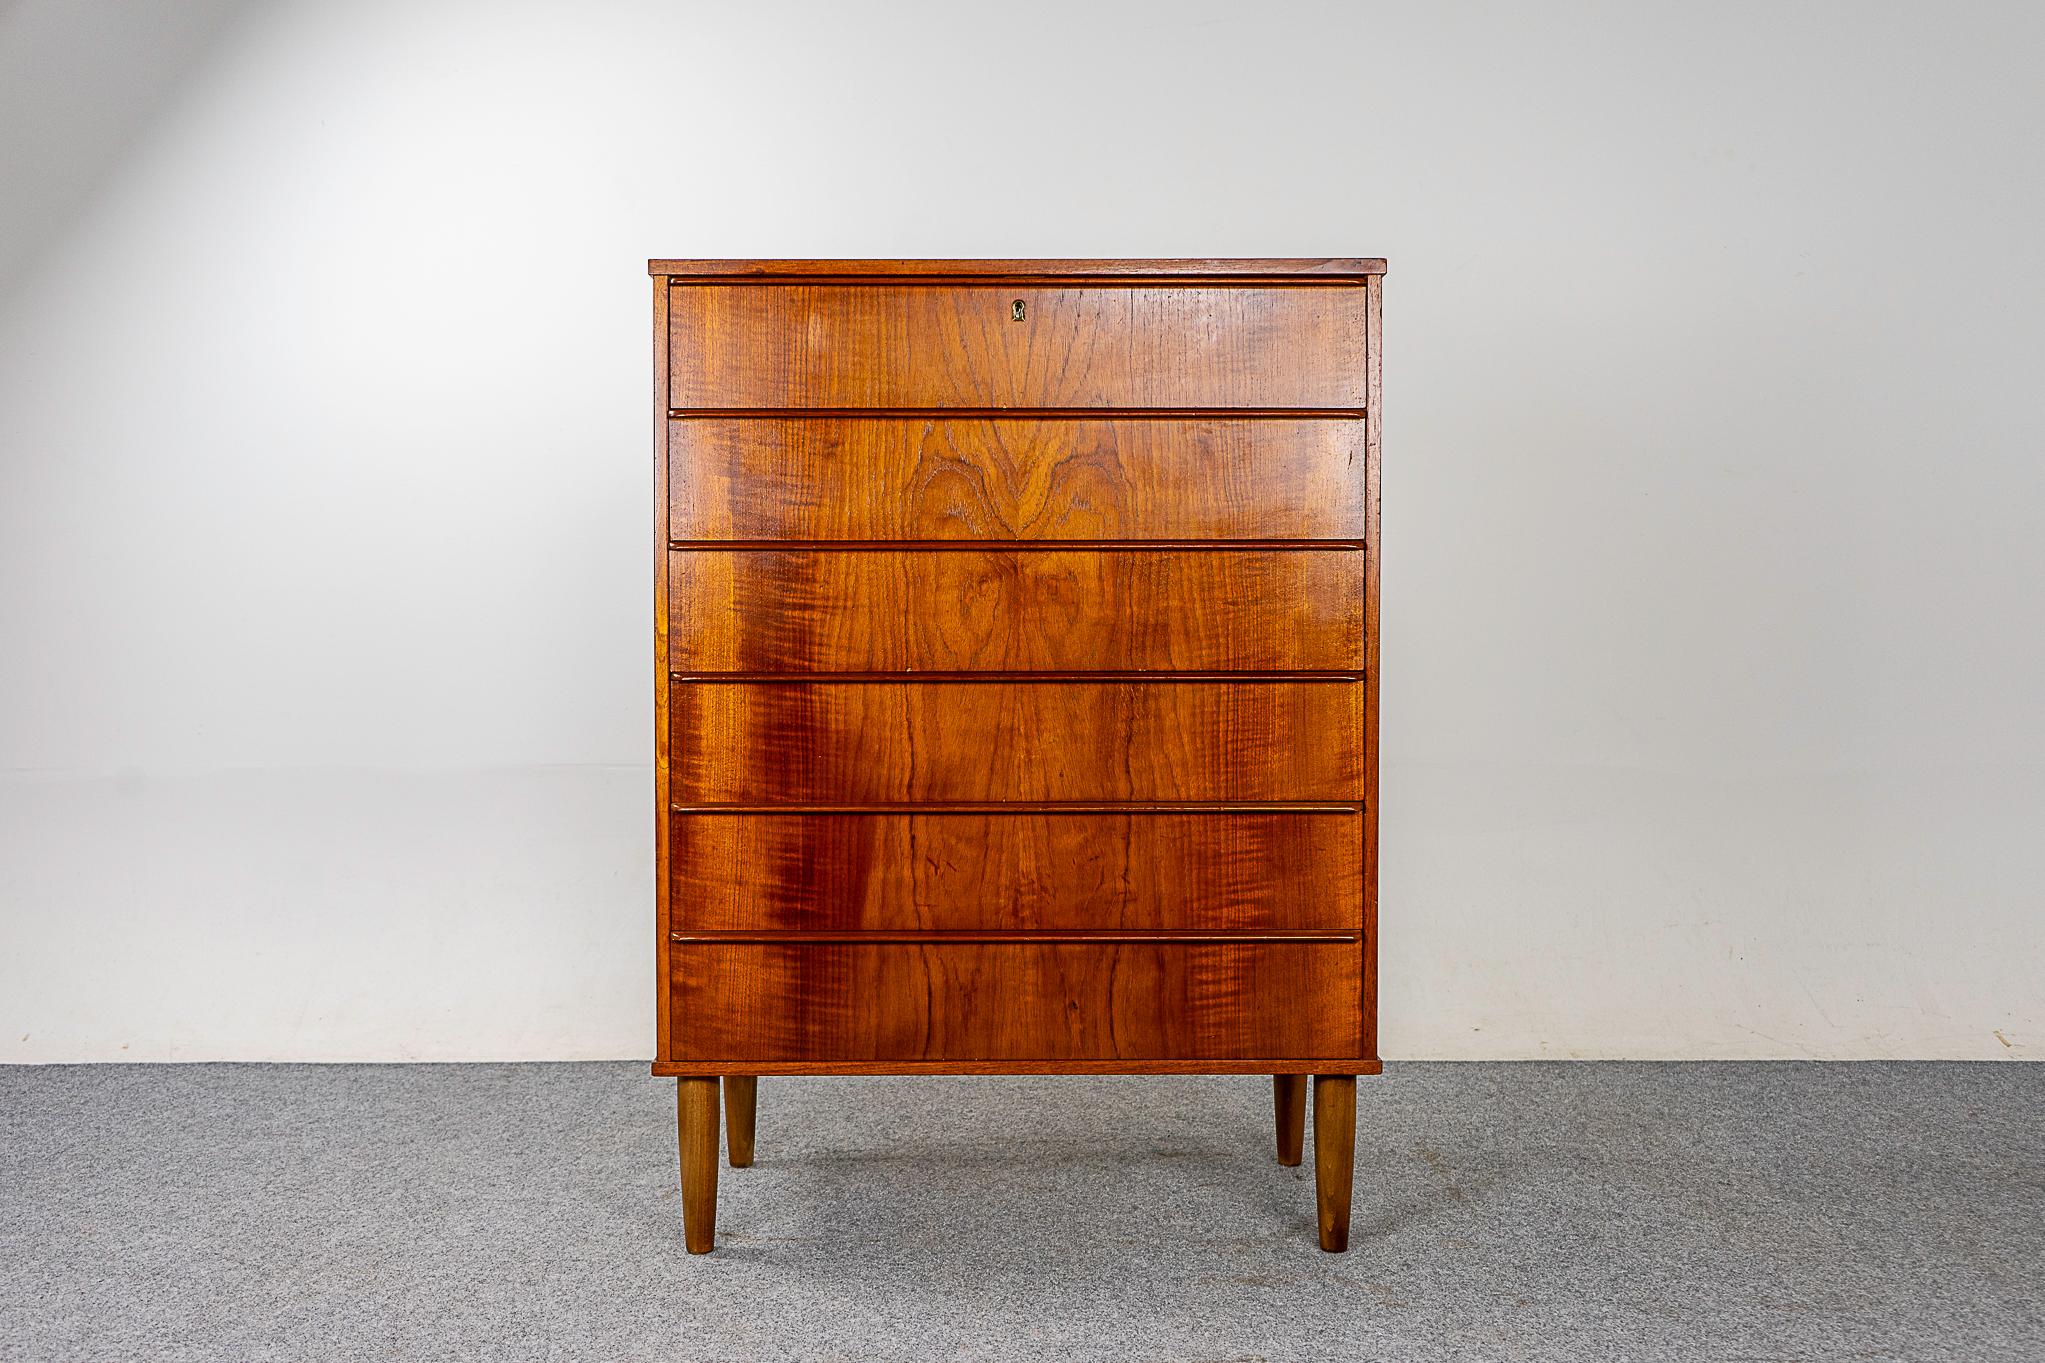 Teak Danish modern highboy dresser, circa 1960's. Six drawer dresser with solid wood edging and stunning book-matched veneer. Dovetail construction and integrated horizontal drawer pulls, opening and closing the drawers is a breeze!

Please inquire